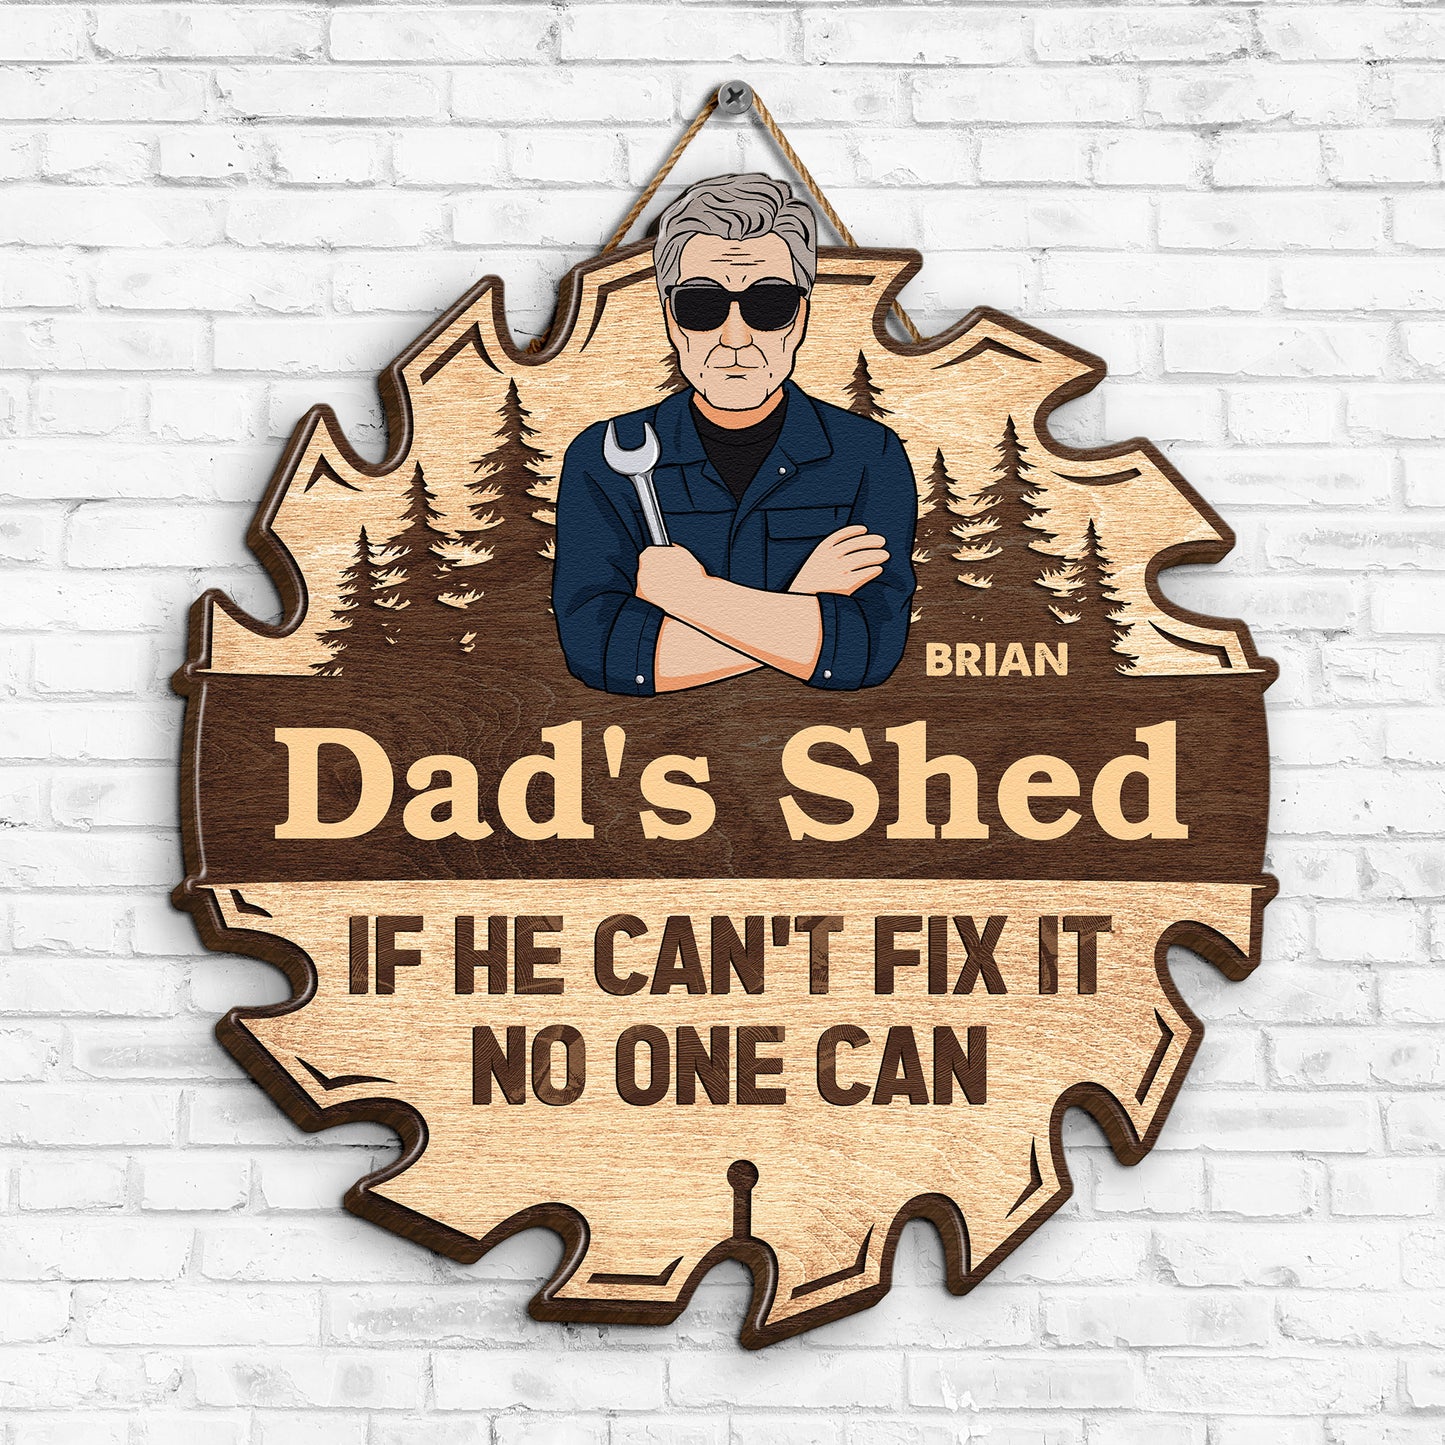 Dad's Shed If He Can't Fix It No One Can - Personalized Wood Sign